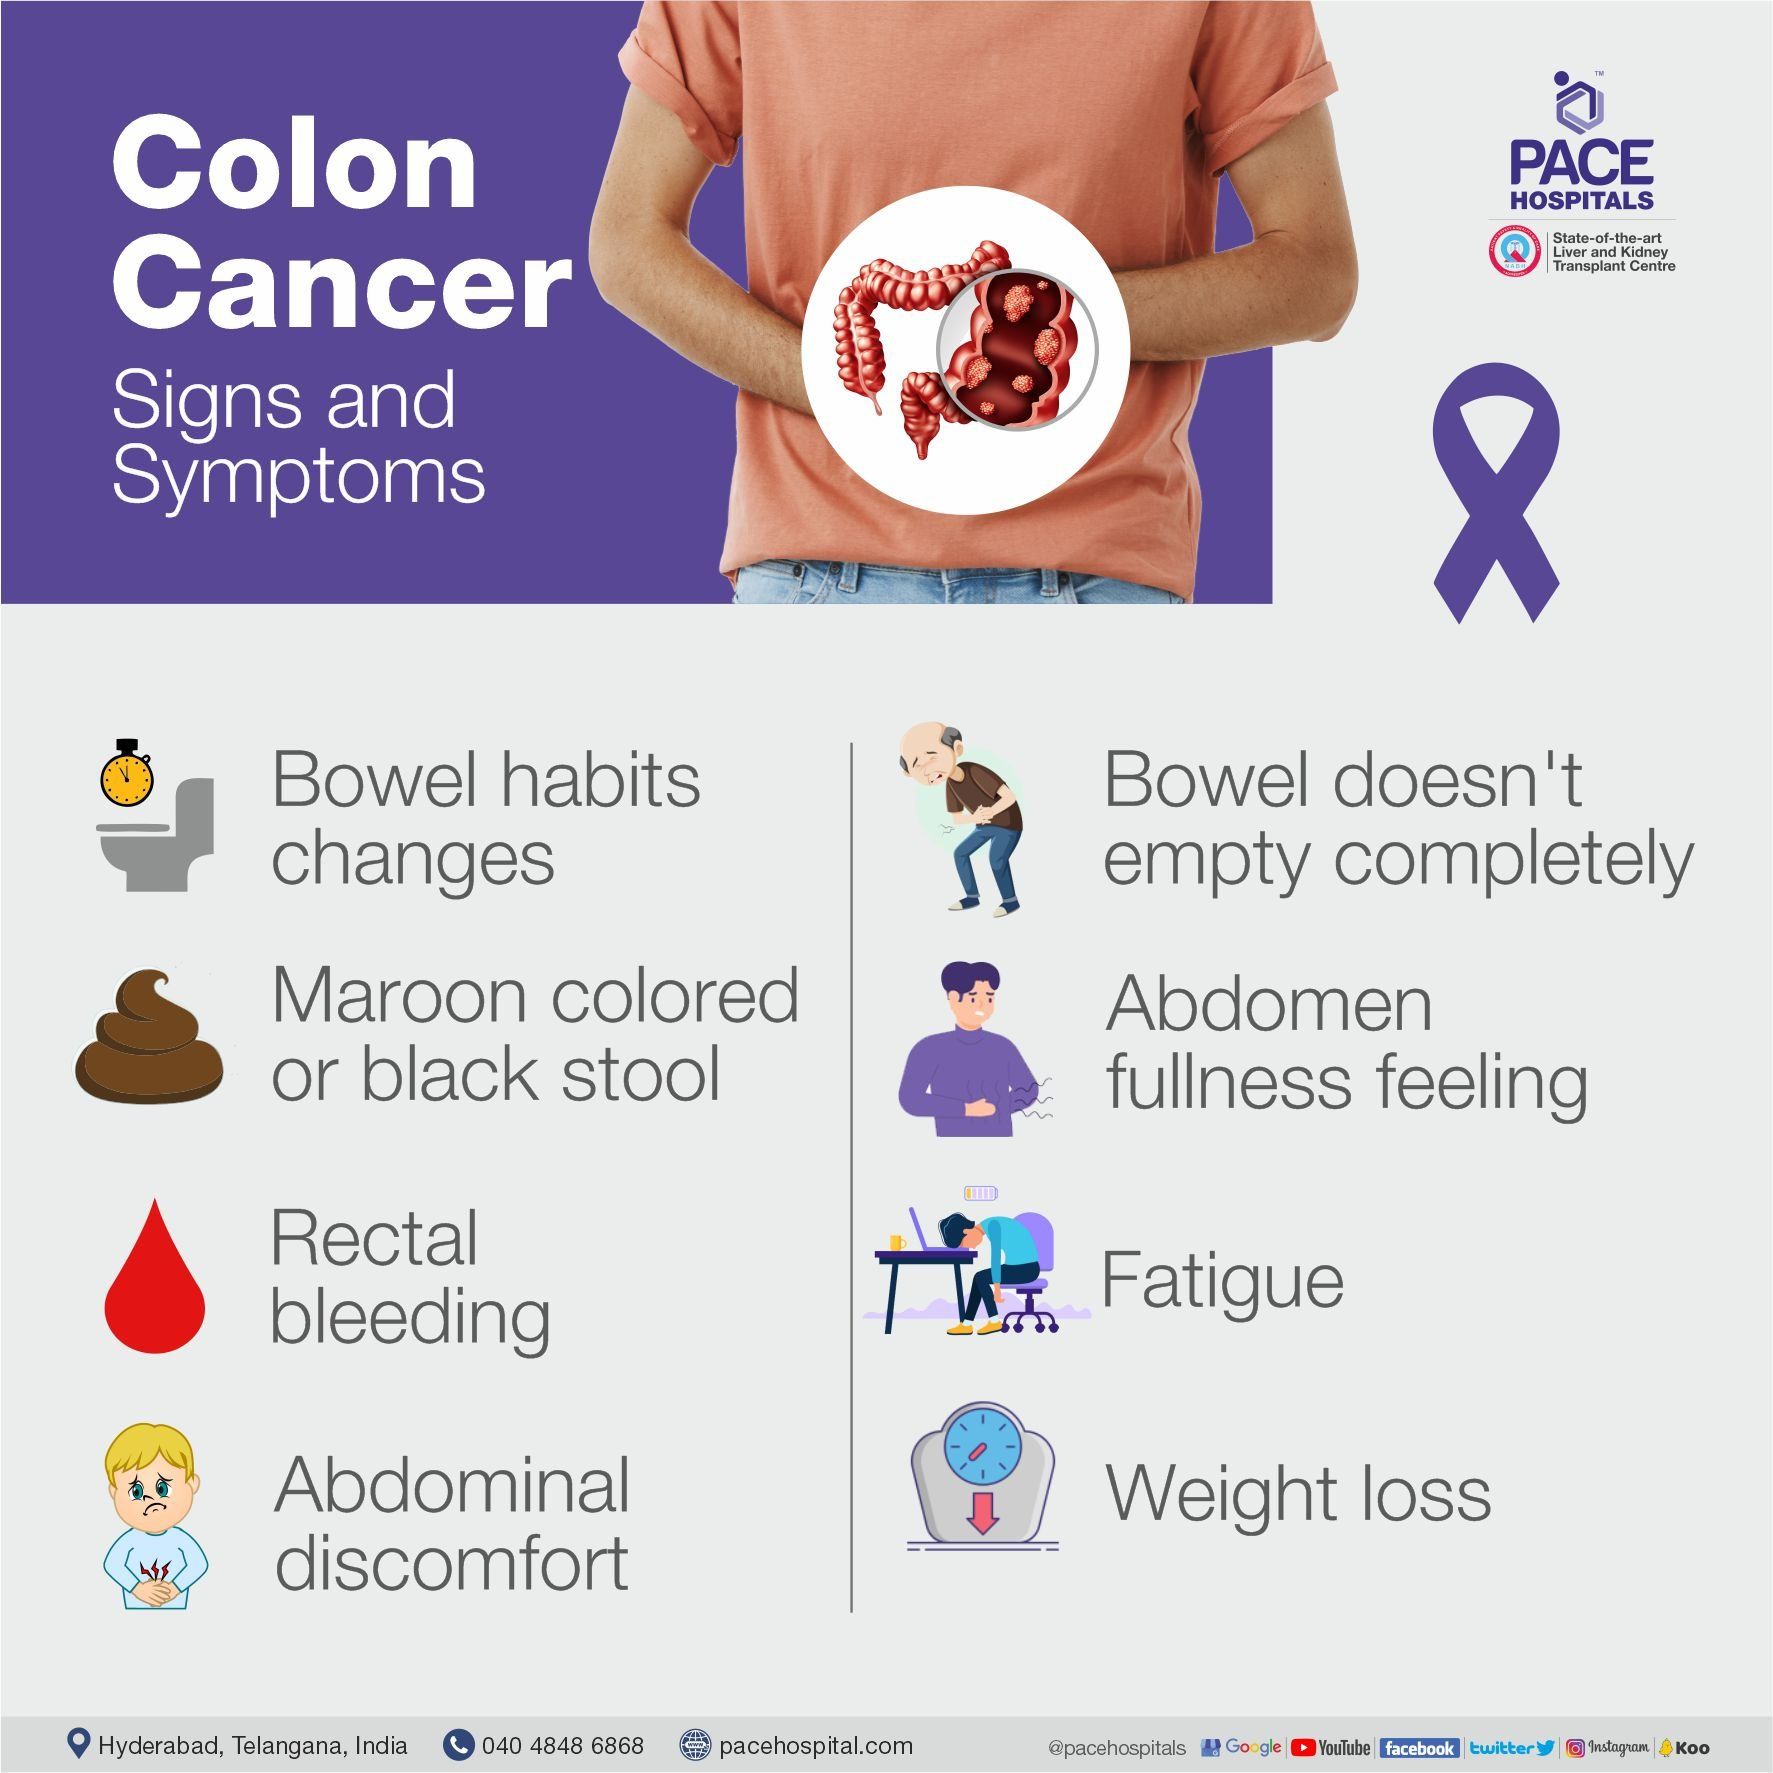 Colon Cancer symptoms and signs